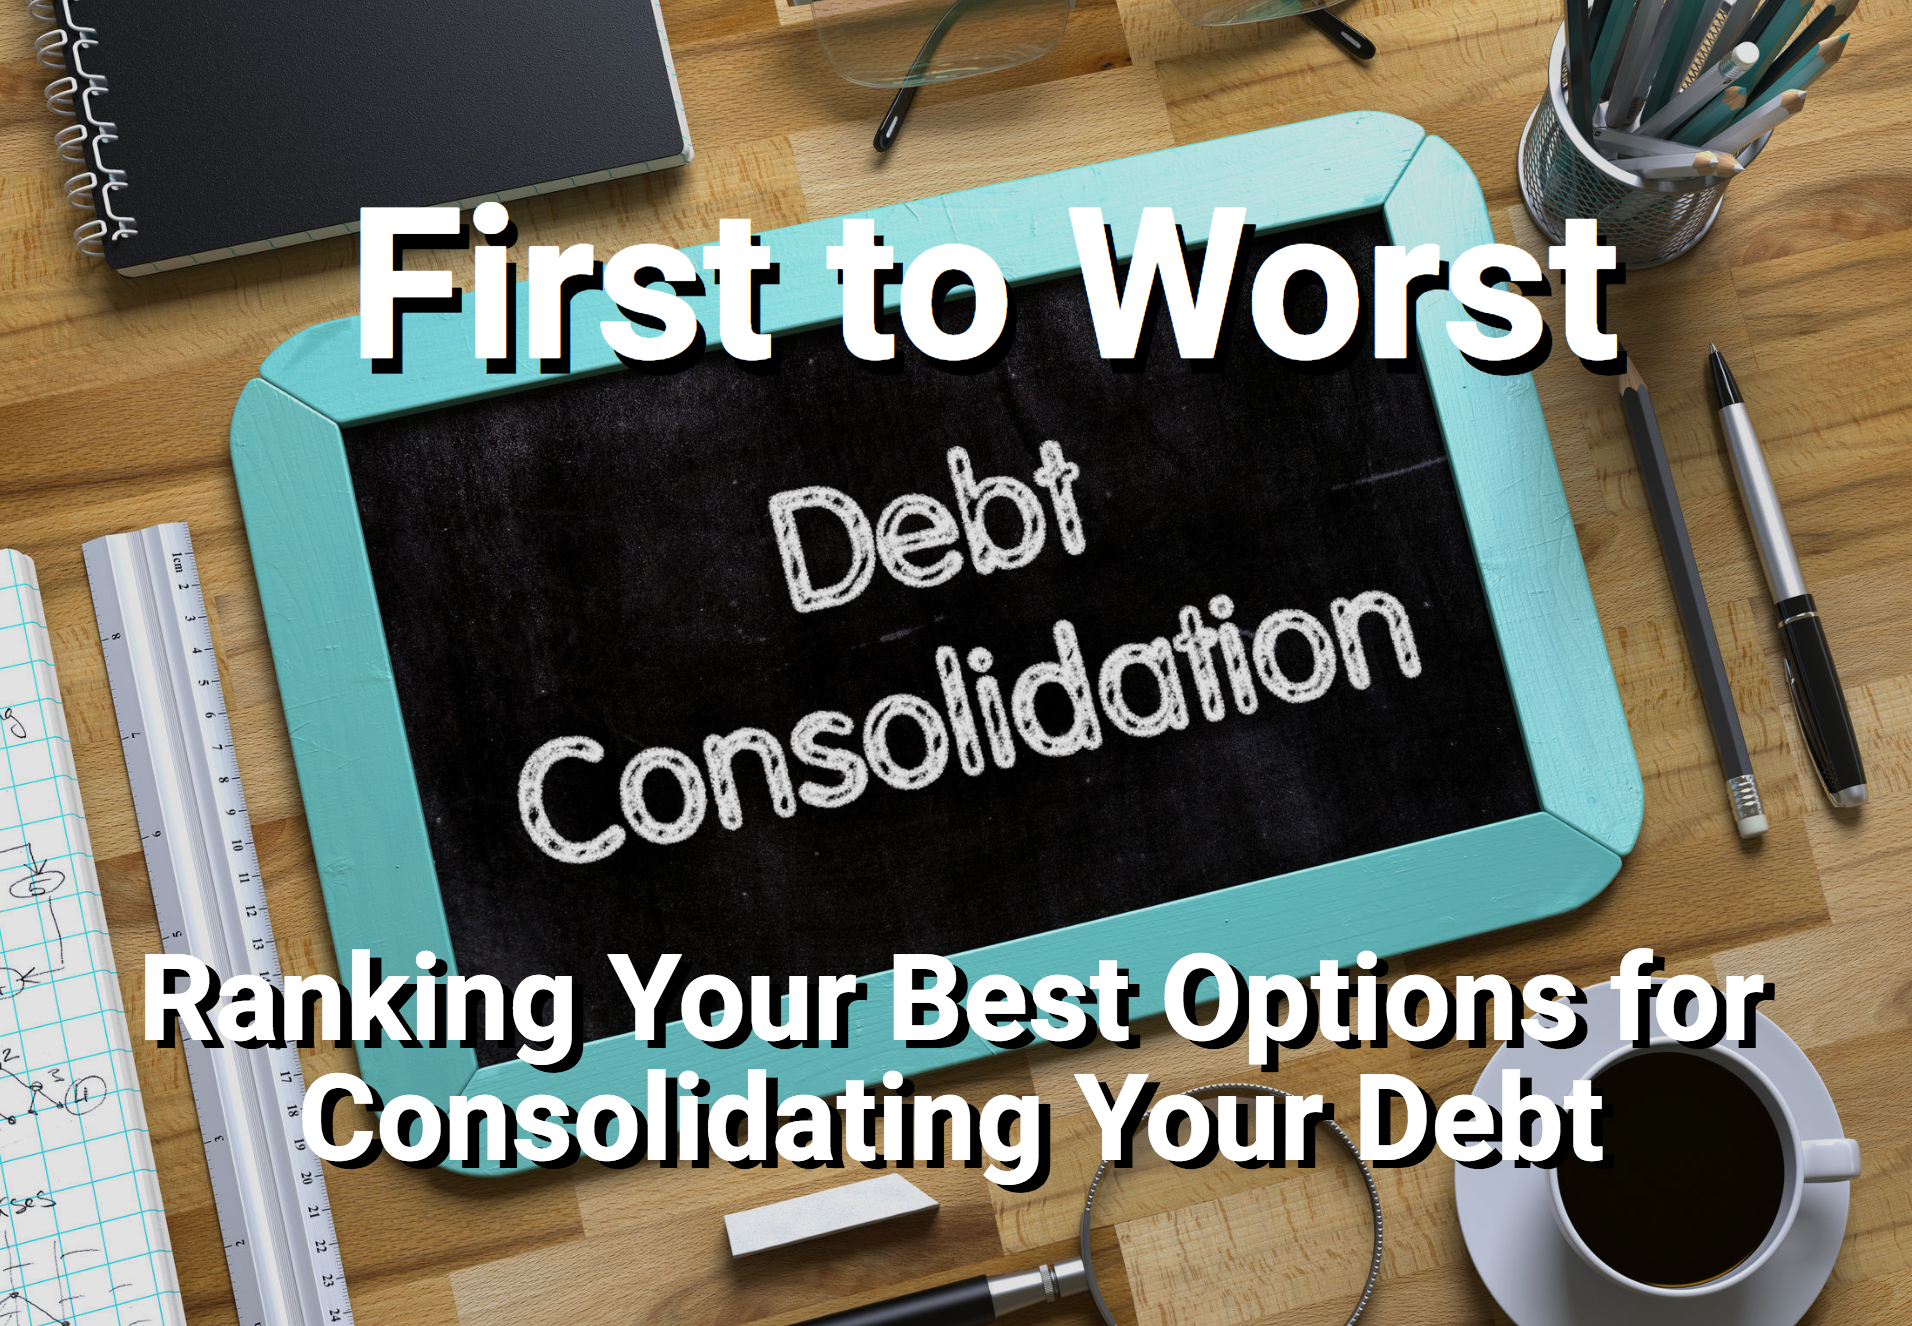 Debt consolidation on caulk board with coffee, glasses, and more